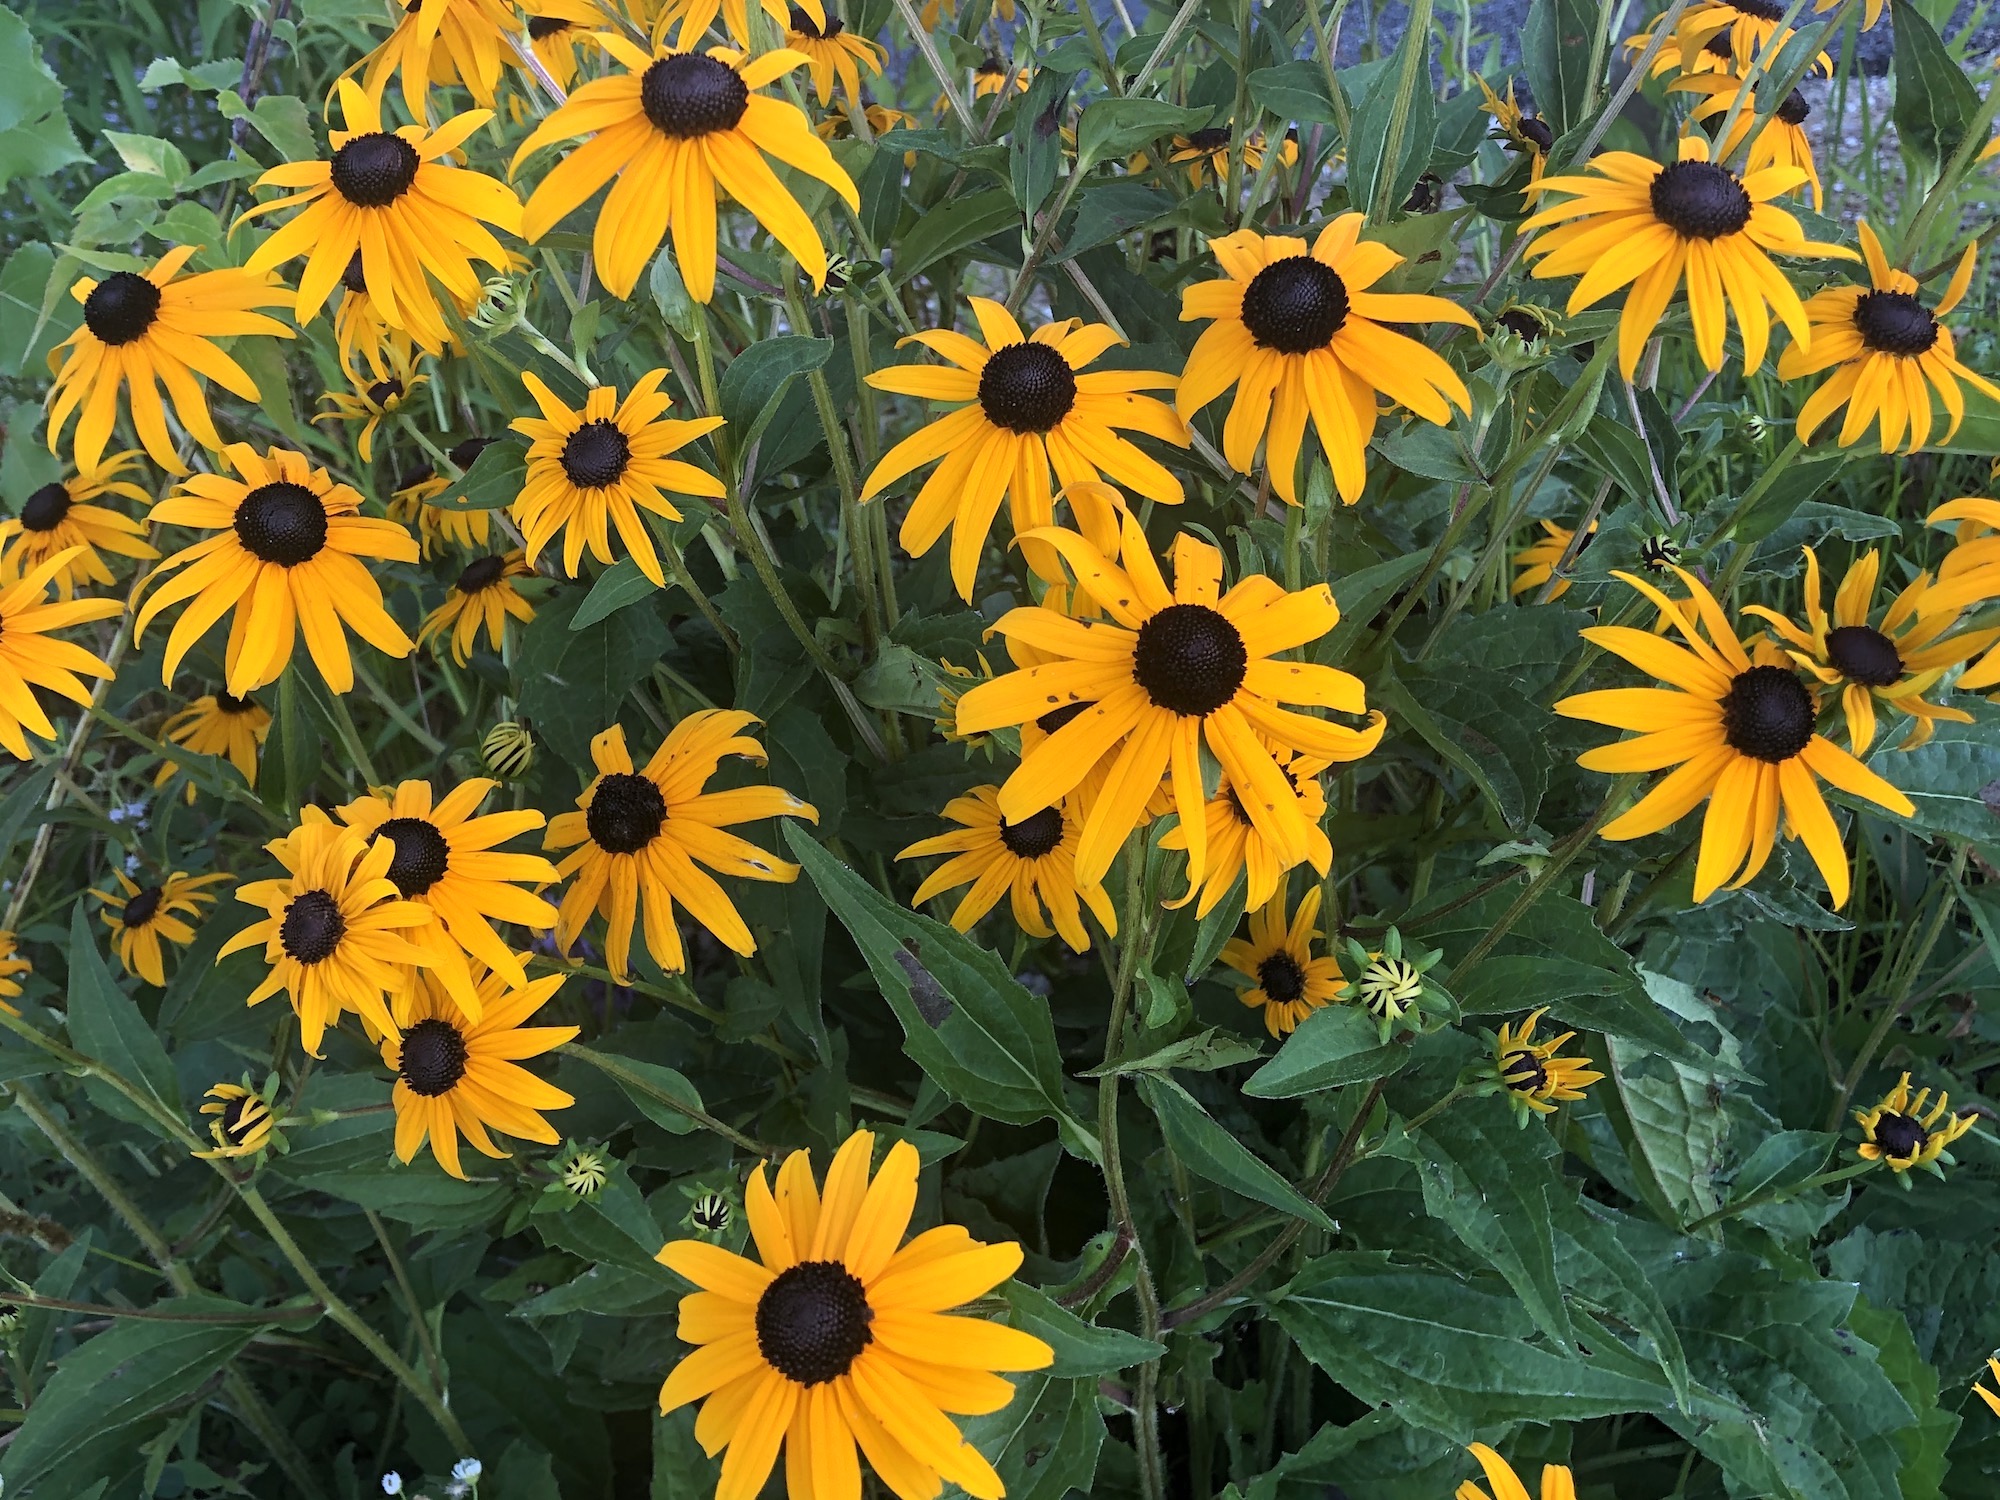 Black-eyed Susan on banks of Marion Dunn Pond in Madison, Wisconsin on July 29, 2020.